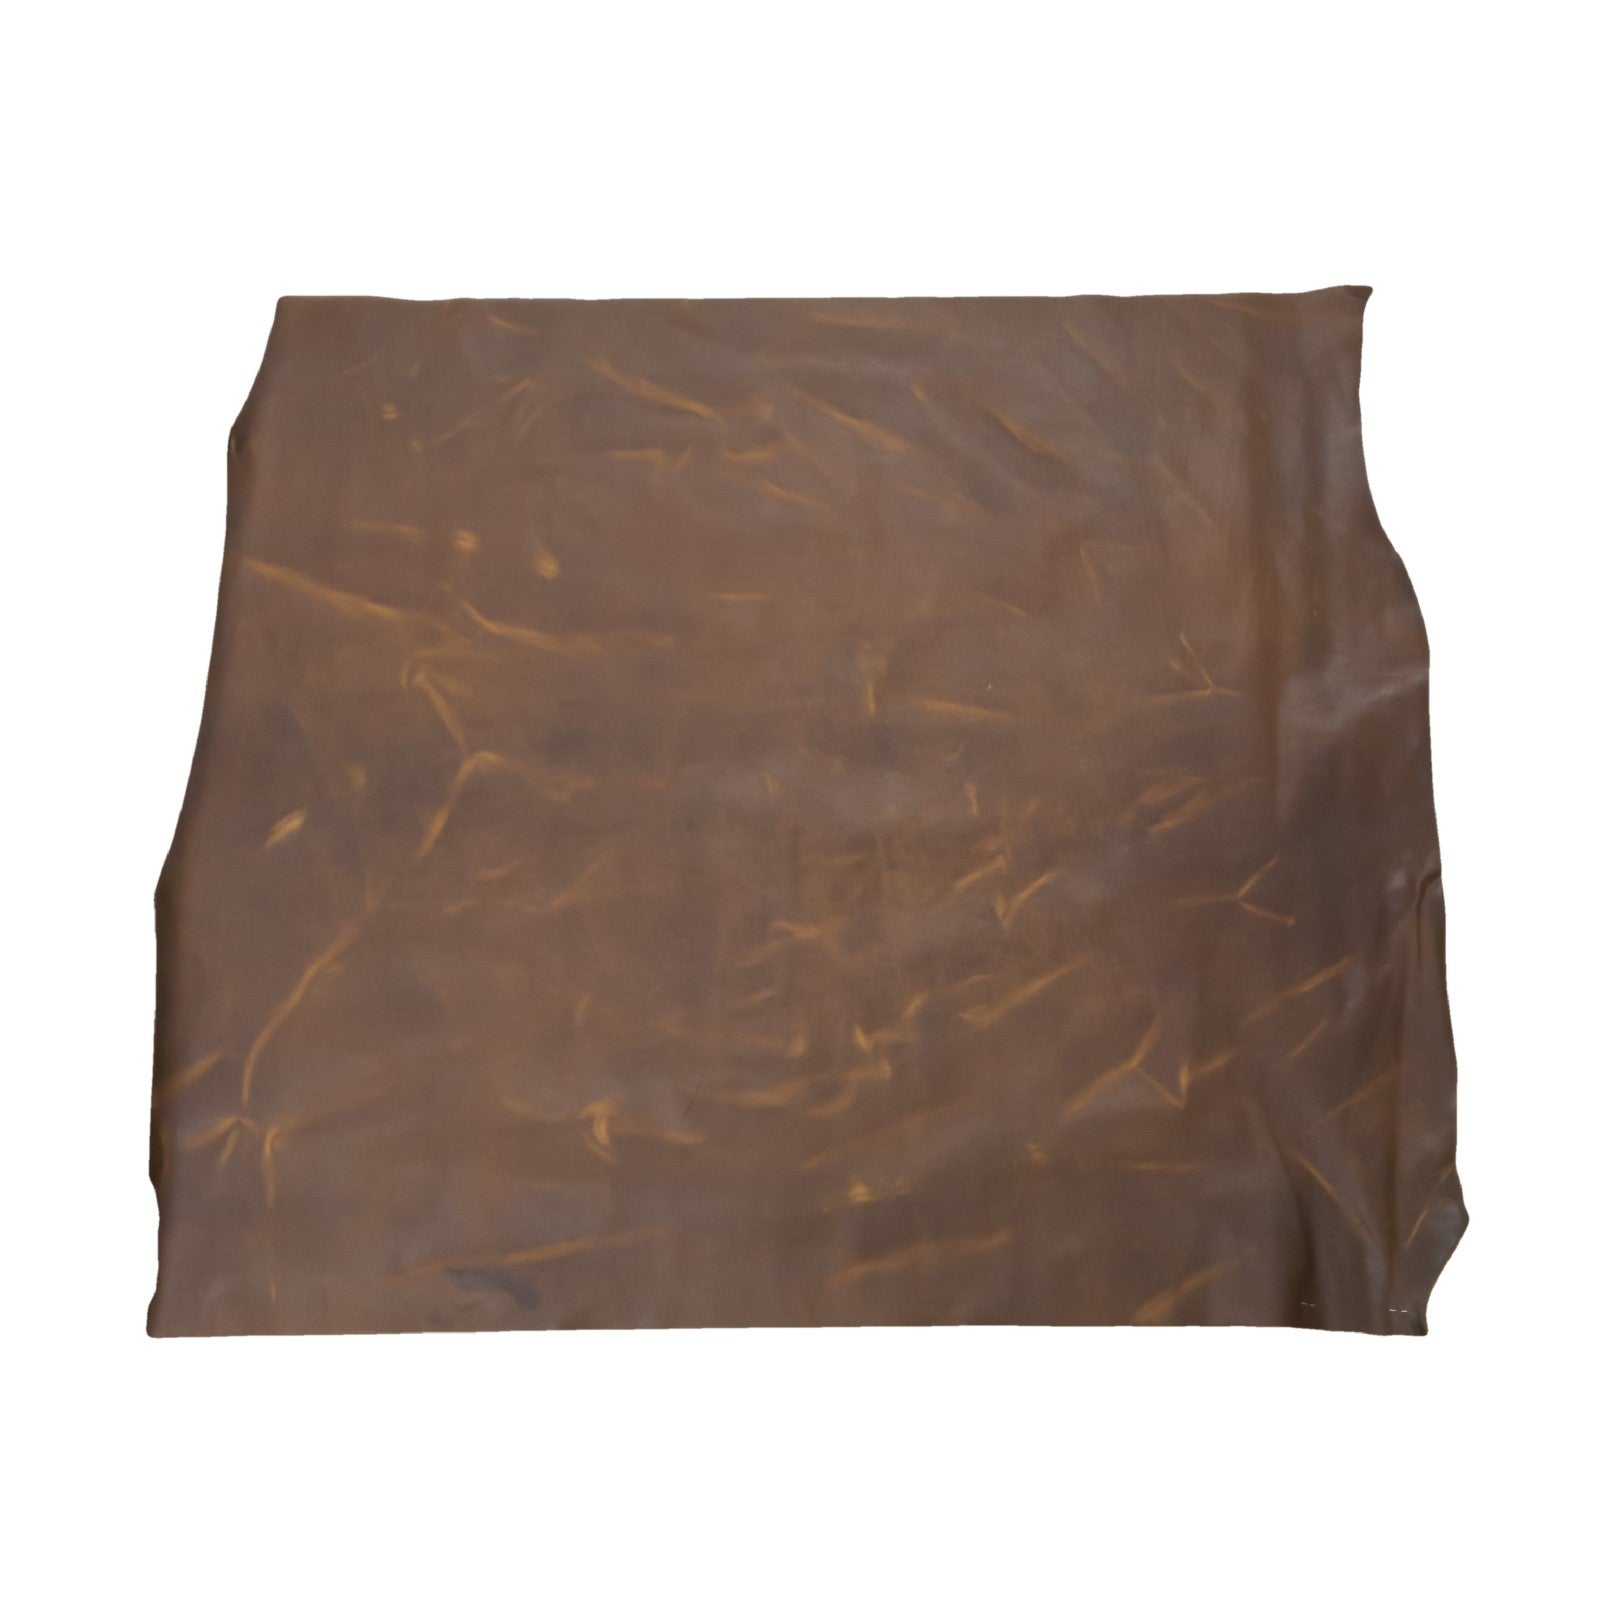 Himalaya Mt Brown, Chap Cow Sides, Highland Ridge, Middle Piece / 6.5-7.5 | The Leather Guy